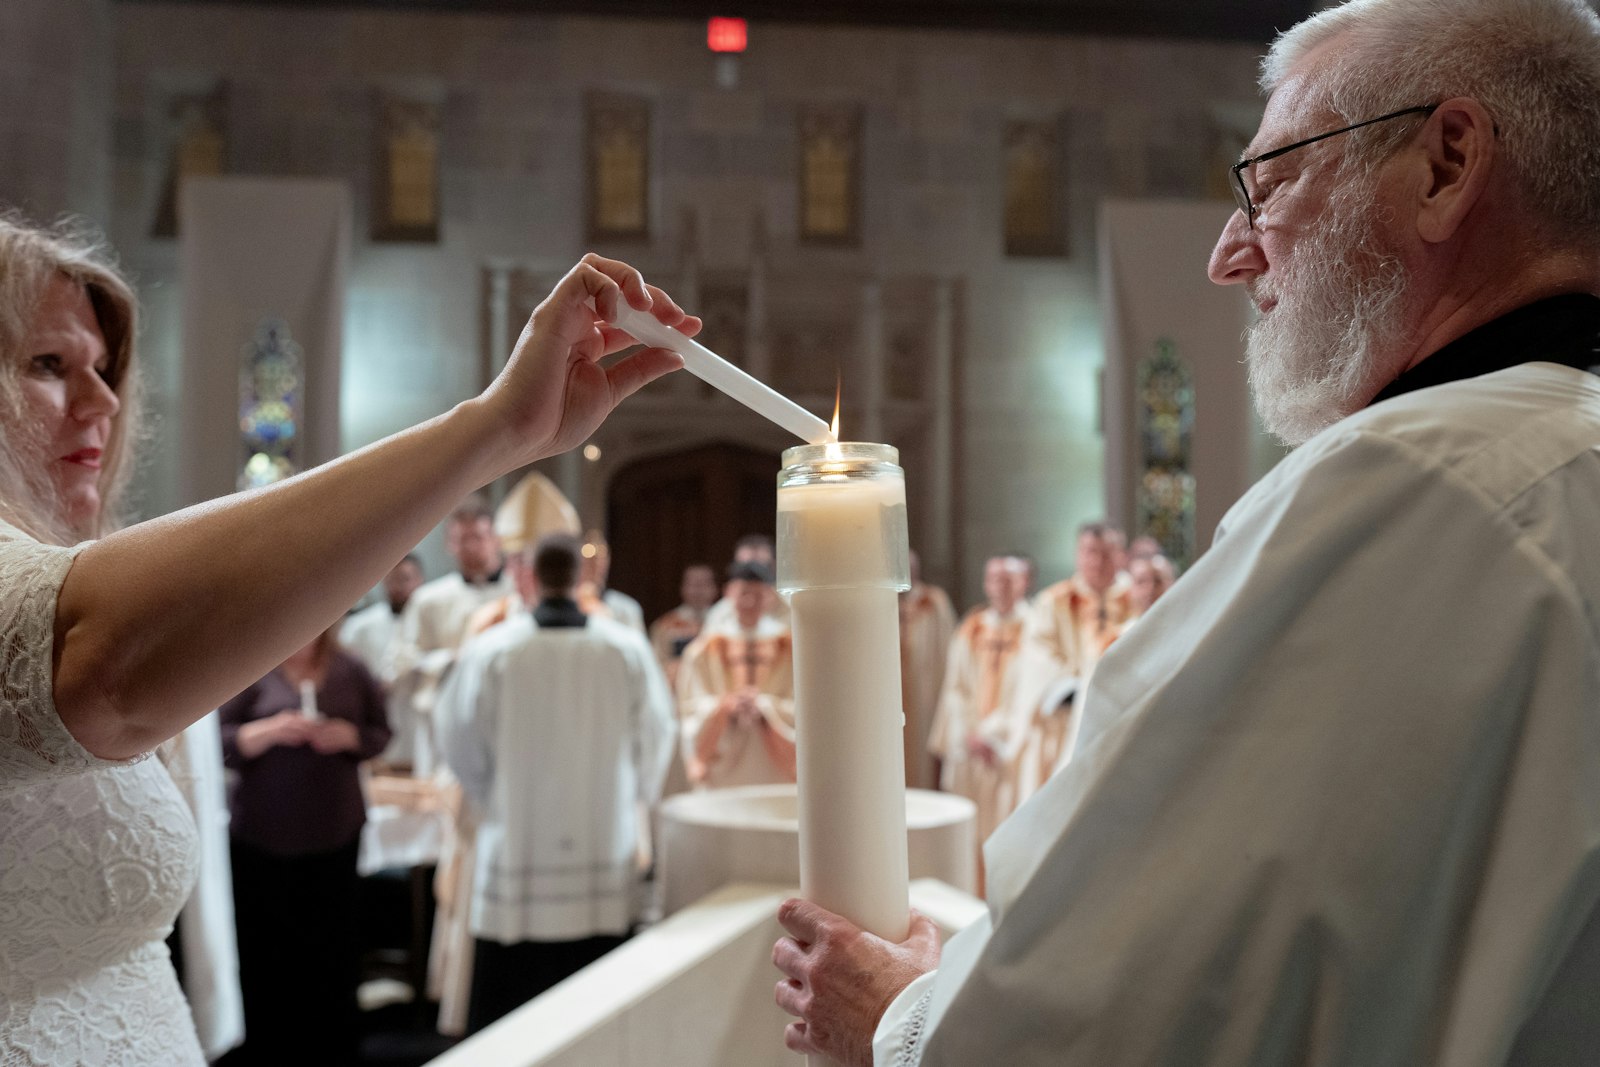 Sponsors, catechists and family members share light from the Easter candle after six people were baptized. Four more received confirmation and their first Communions along with those who were newly baptized.